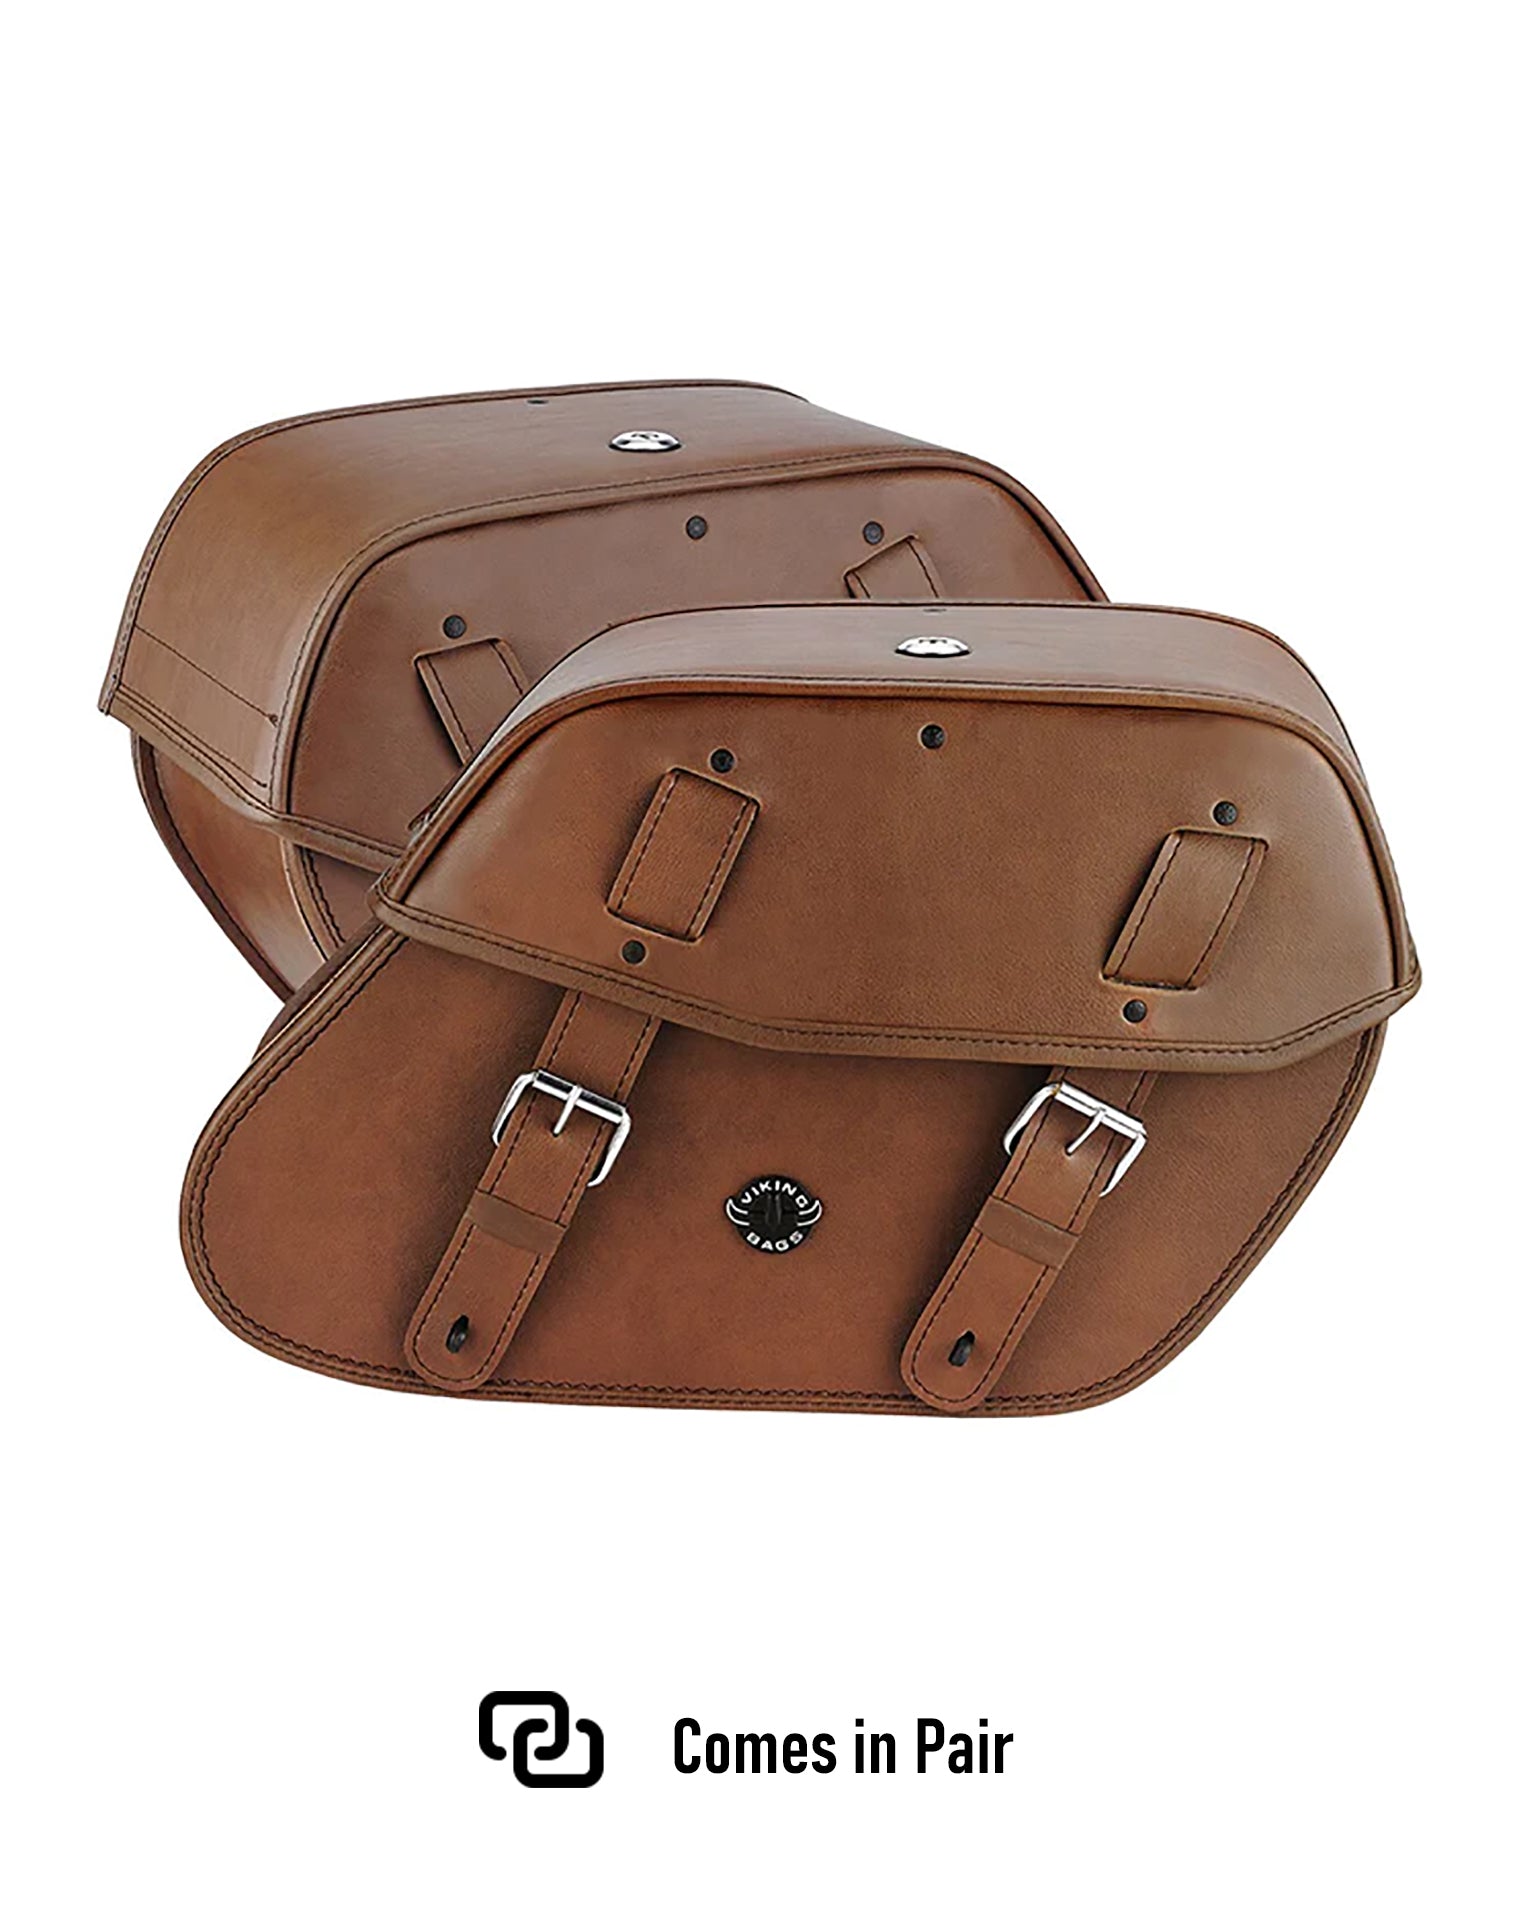 Viking Odin Brown Large Yamaha V Star 950 Leather Motorcycle Saddlebags Weather Resistant Bags Comes in Pair